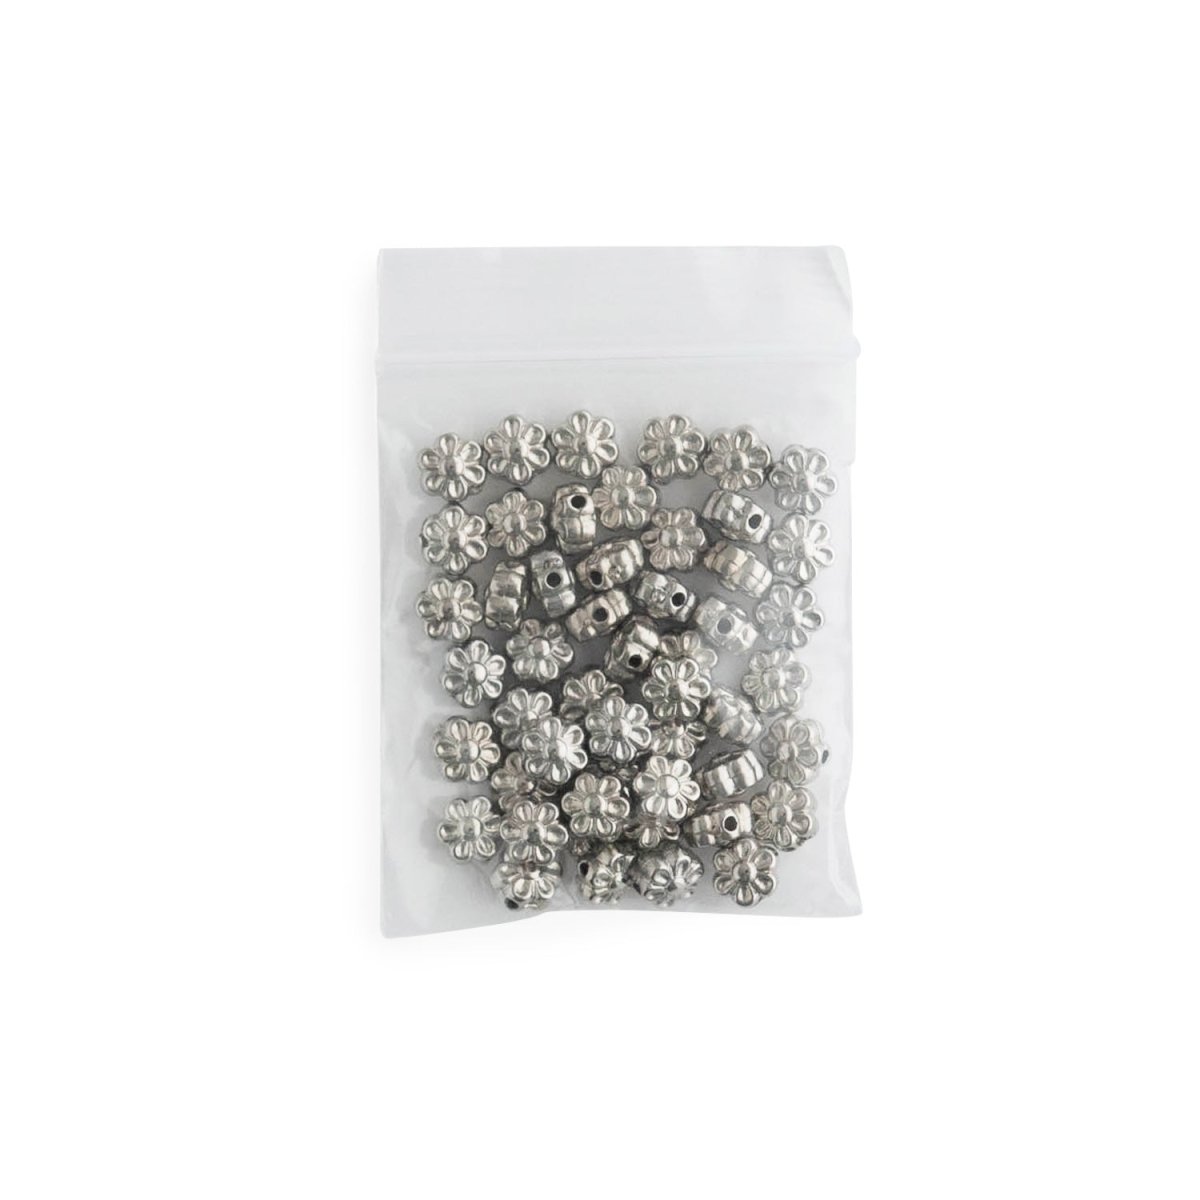 Accent Beads Silver Flowers from Cara & Co Craft Supply